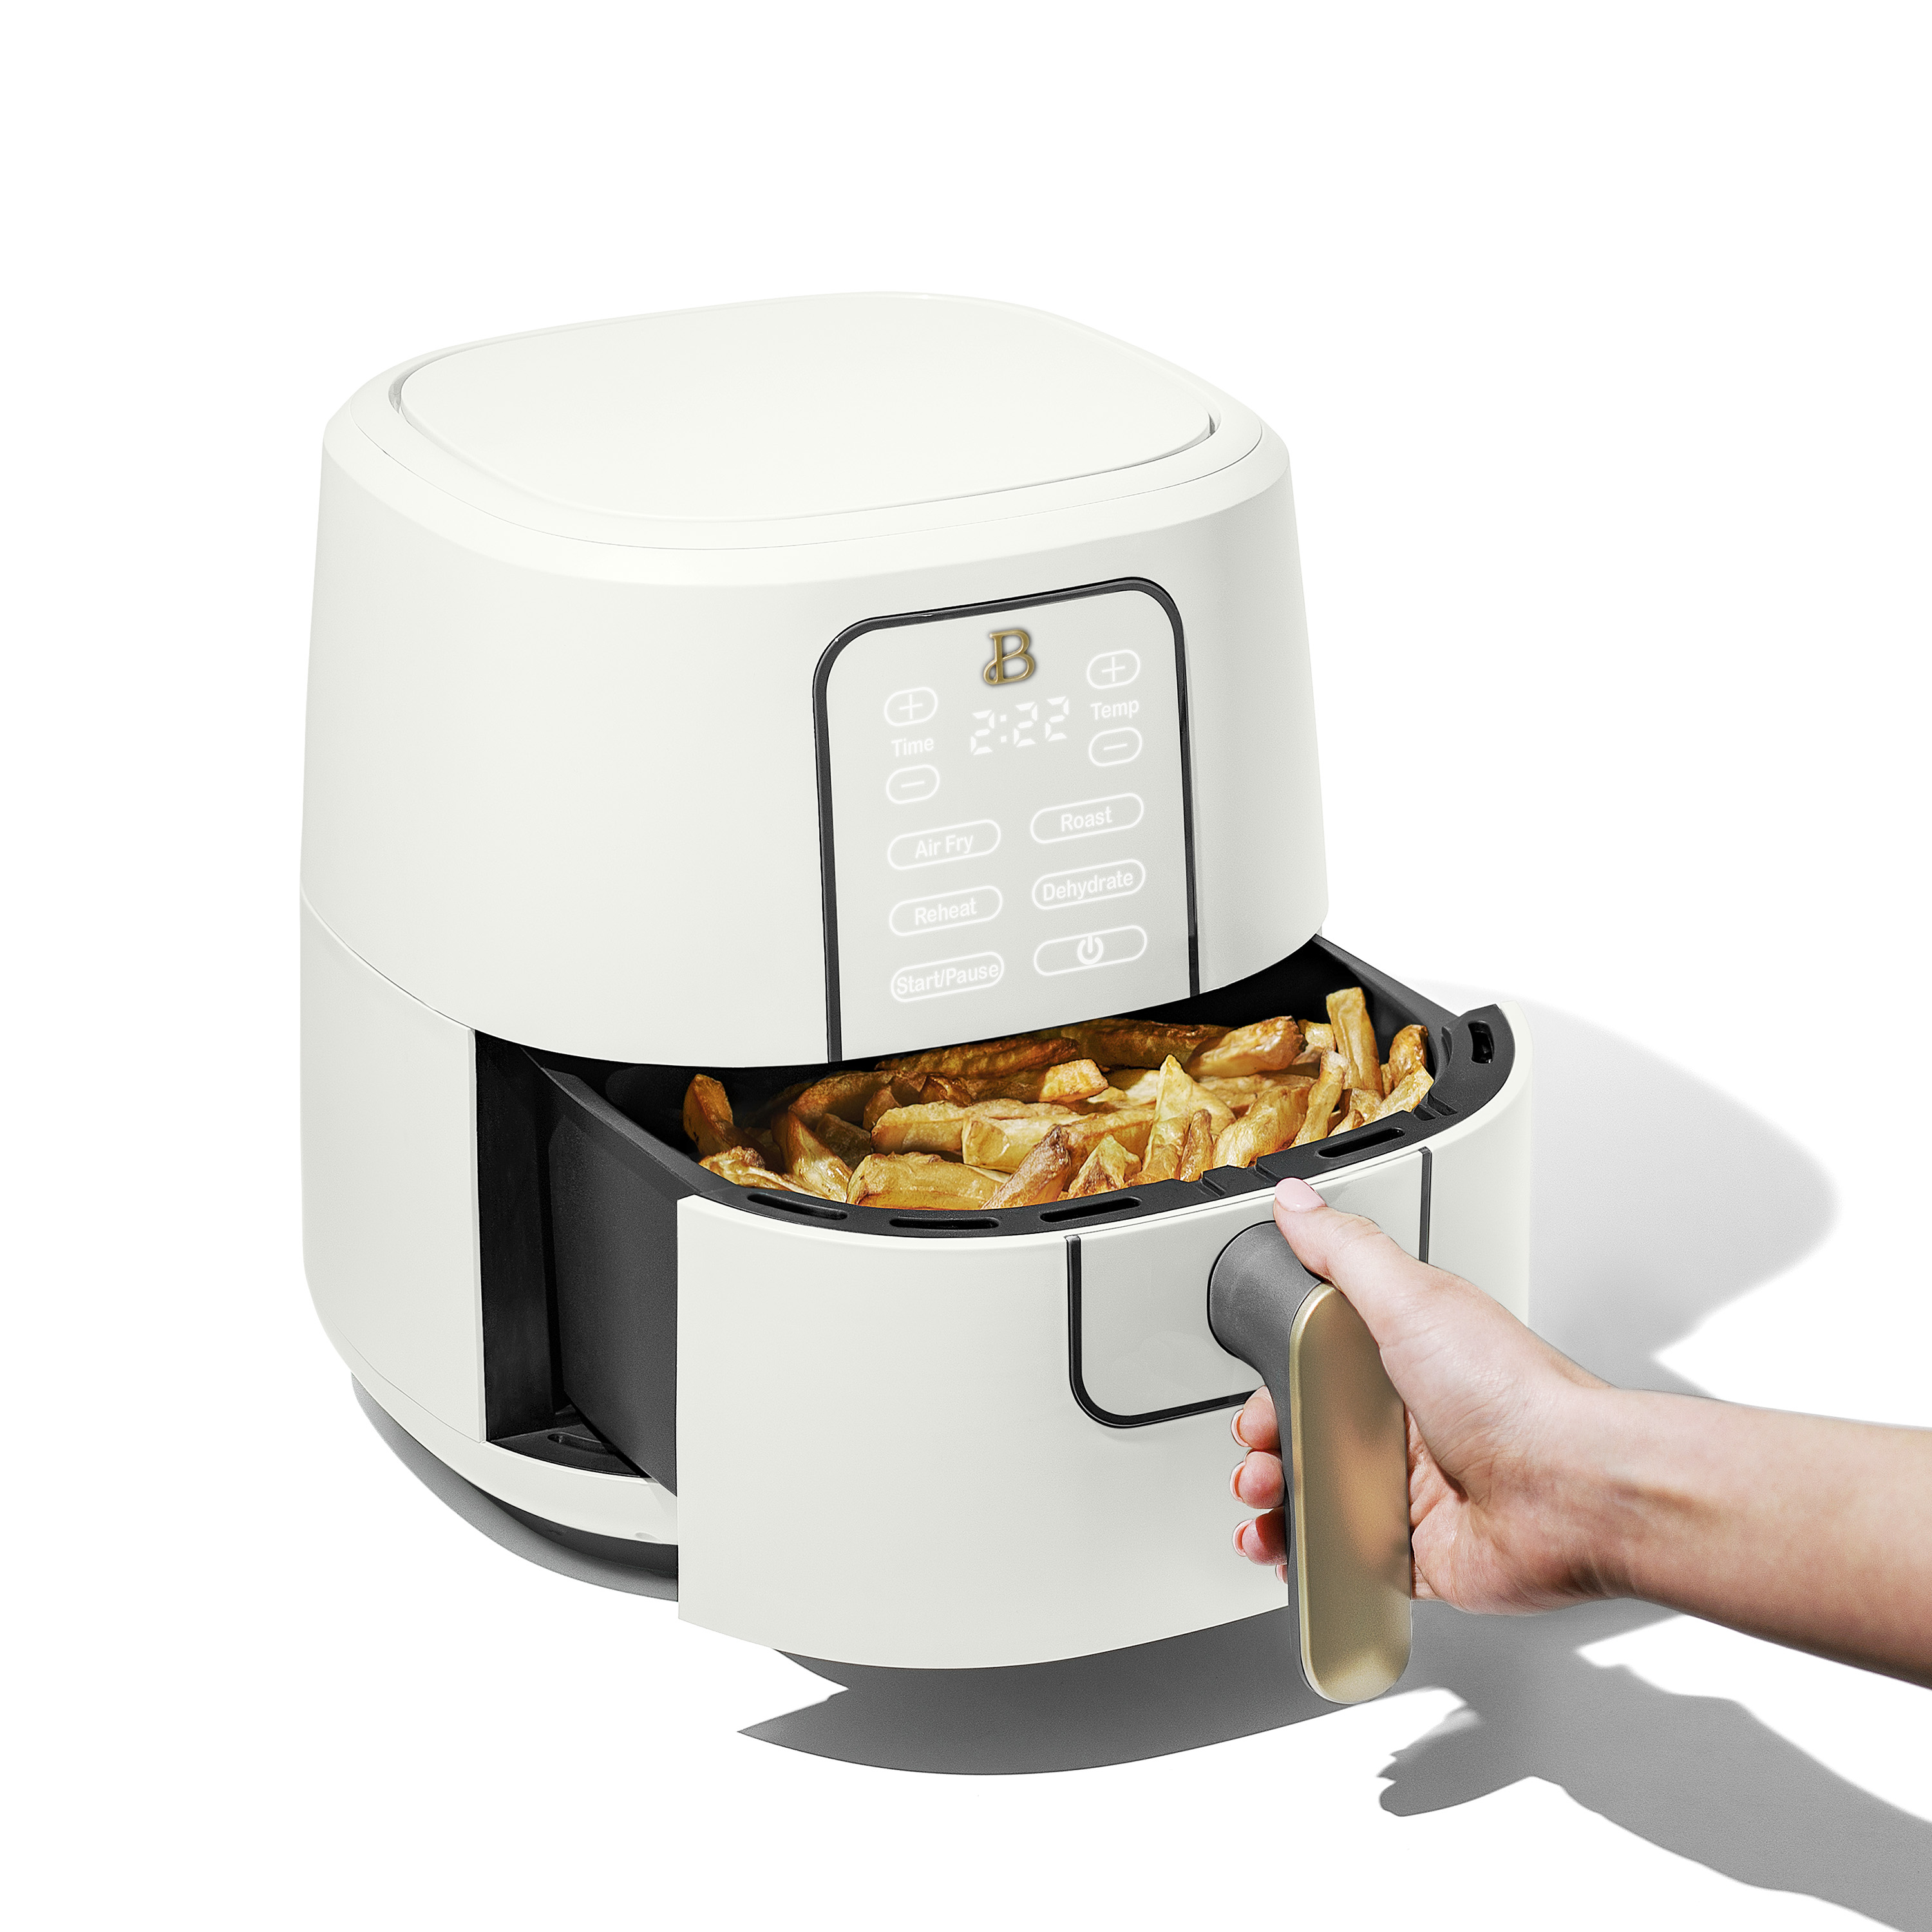 Beautiful 6 Qt Air Fryer with TurboCrisp Technology and Touch-Activated Display, White Icing by Drew Barrymore - image 9 of 9